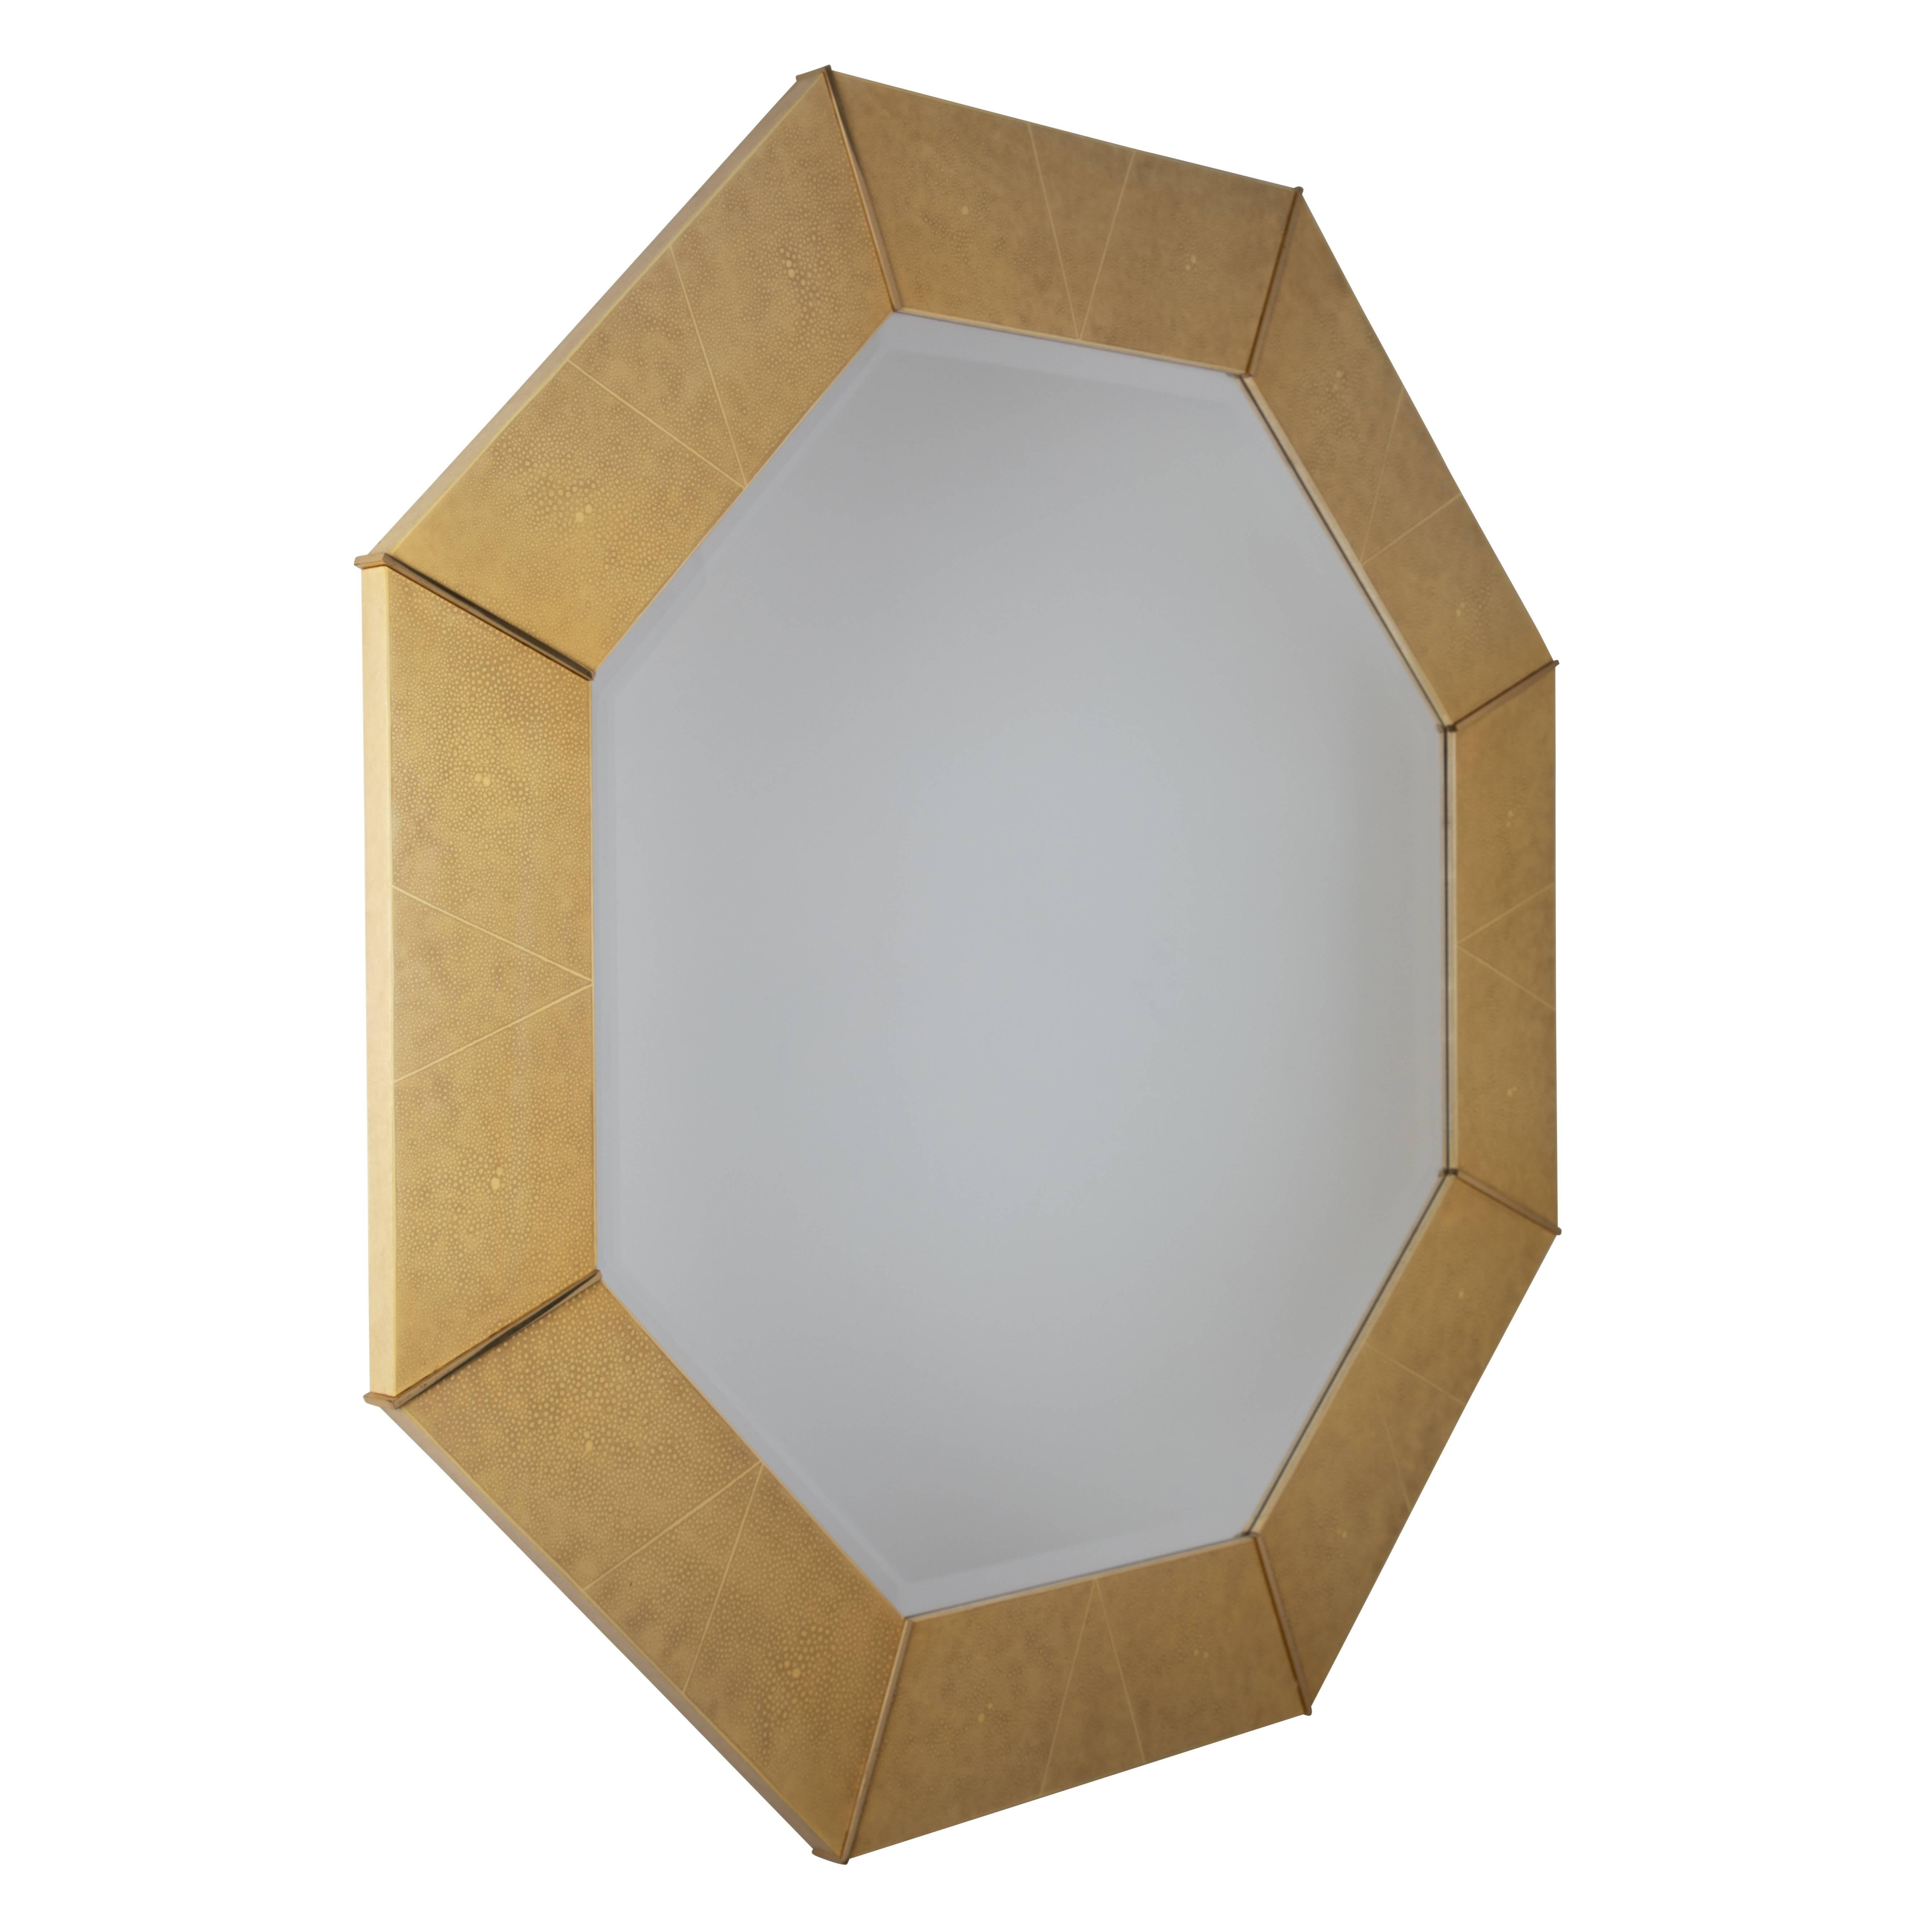 Extraordinary, monumental Karl Springer mirror with hand-painted shagreen pattern and polished brass accents, circa 1970s. Beveled mirror insert. This example illustrates Springer's masterful use of exotic finishes and impeccable construction. 

